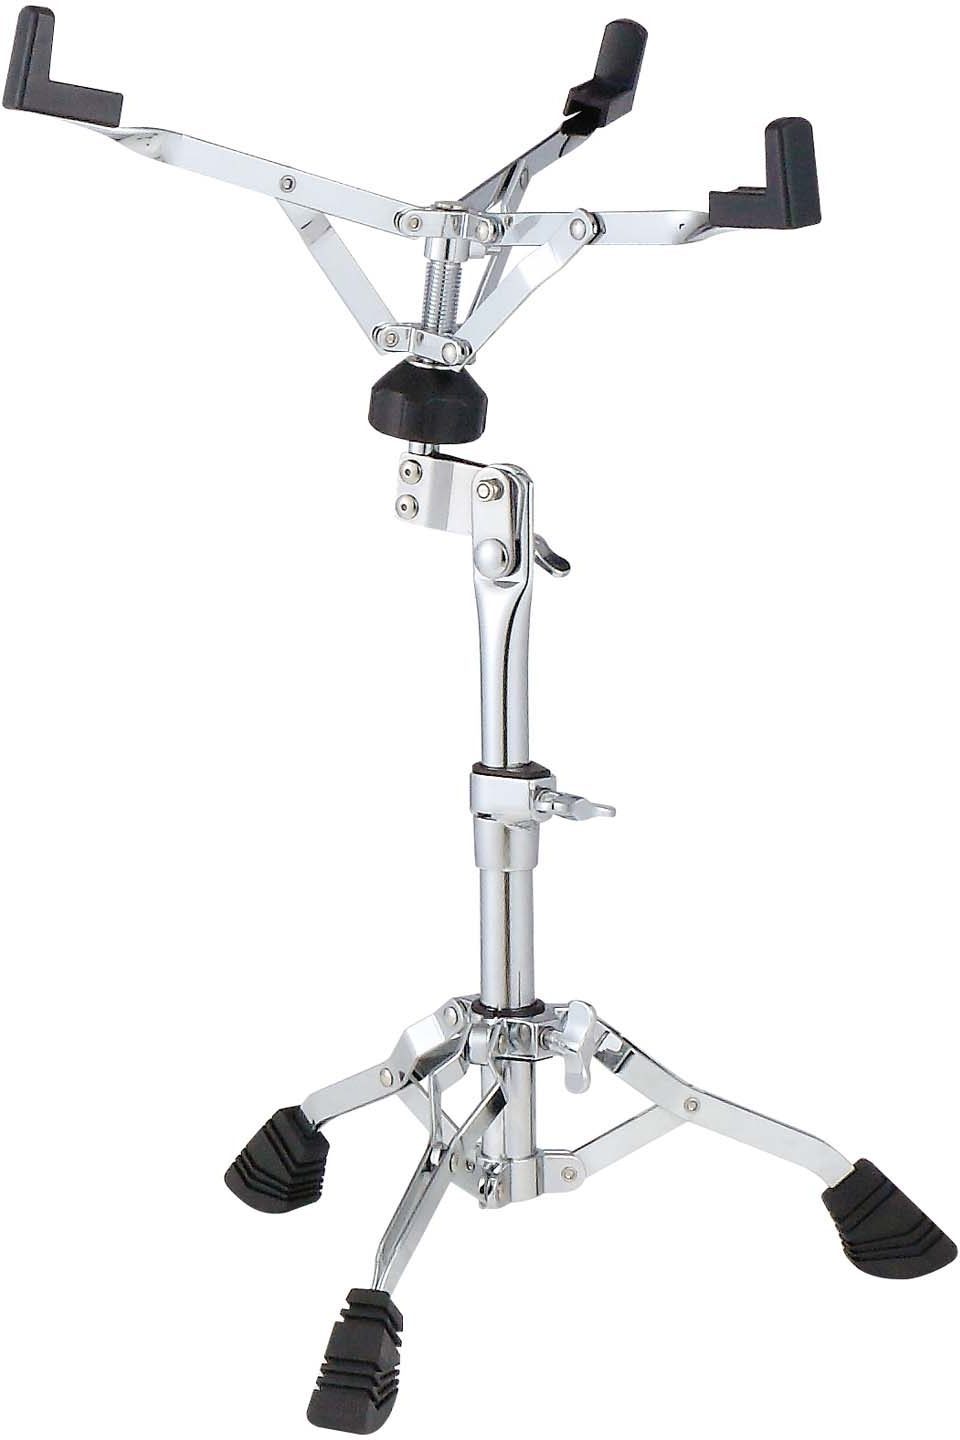 Tama HS40W StageMaster Double-Braced Snare Stand